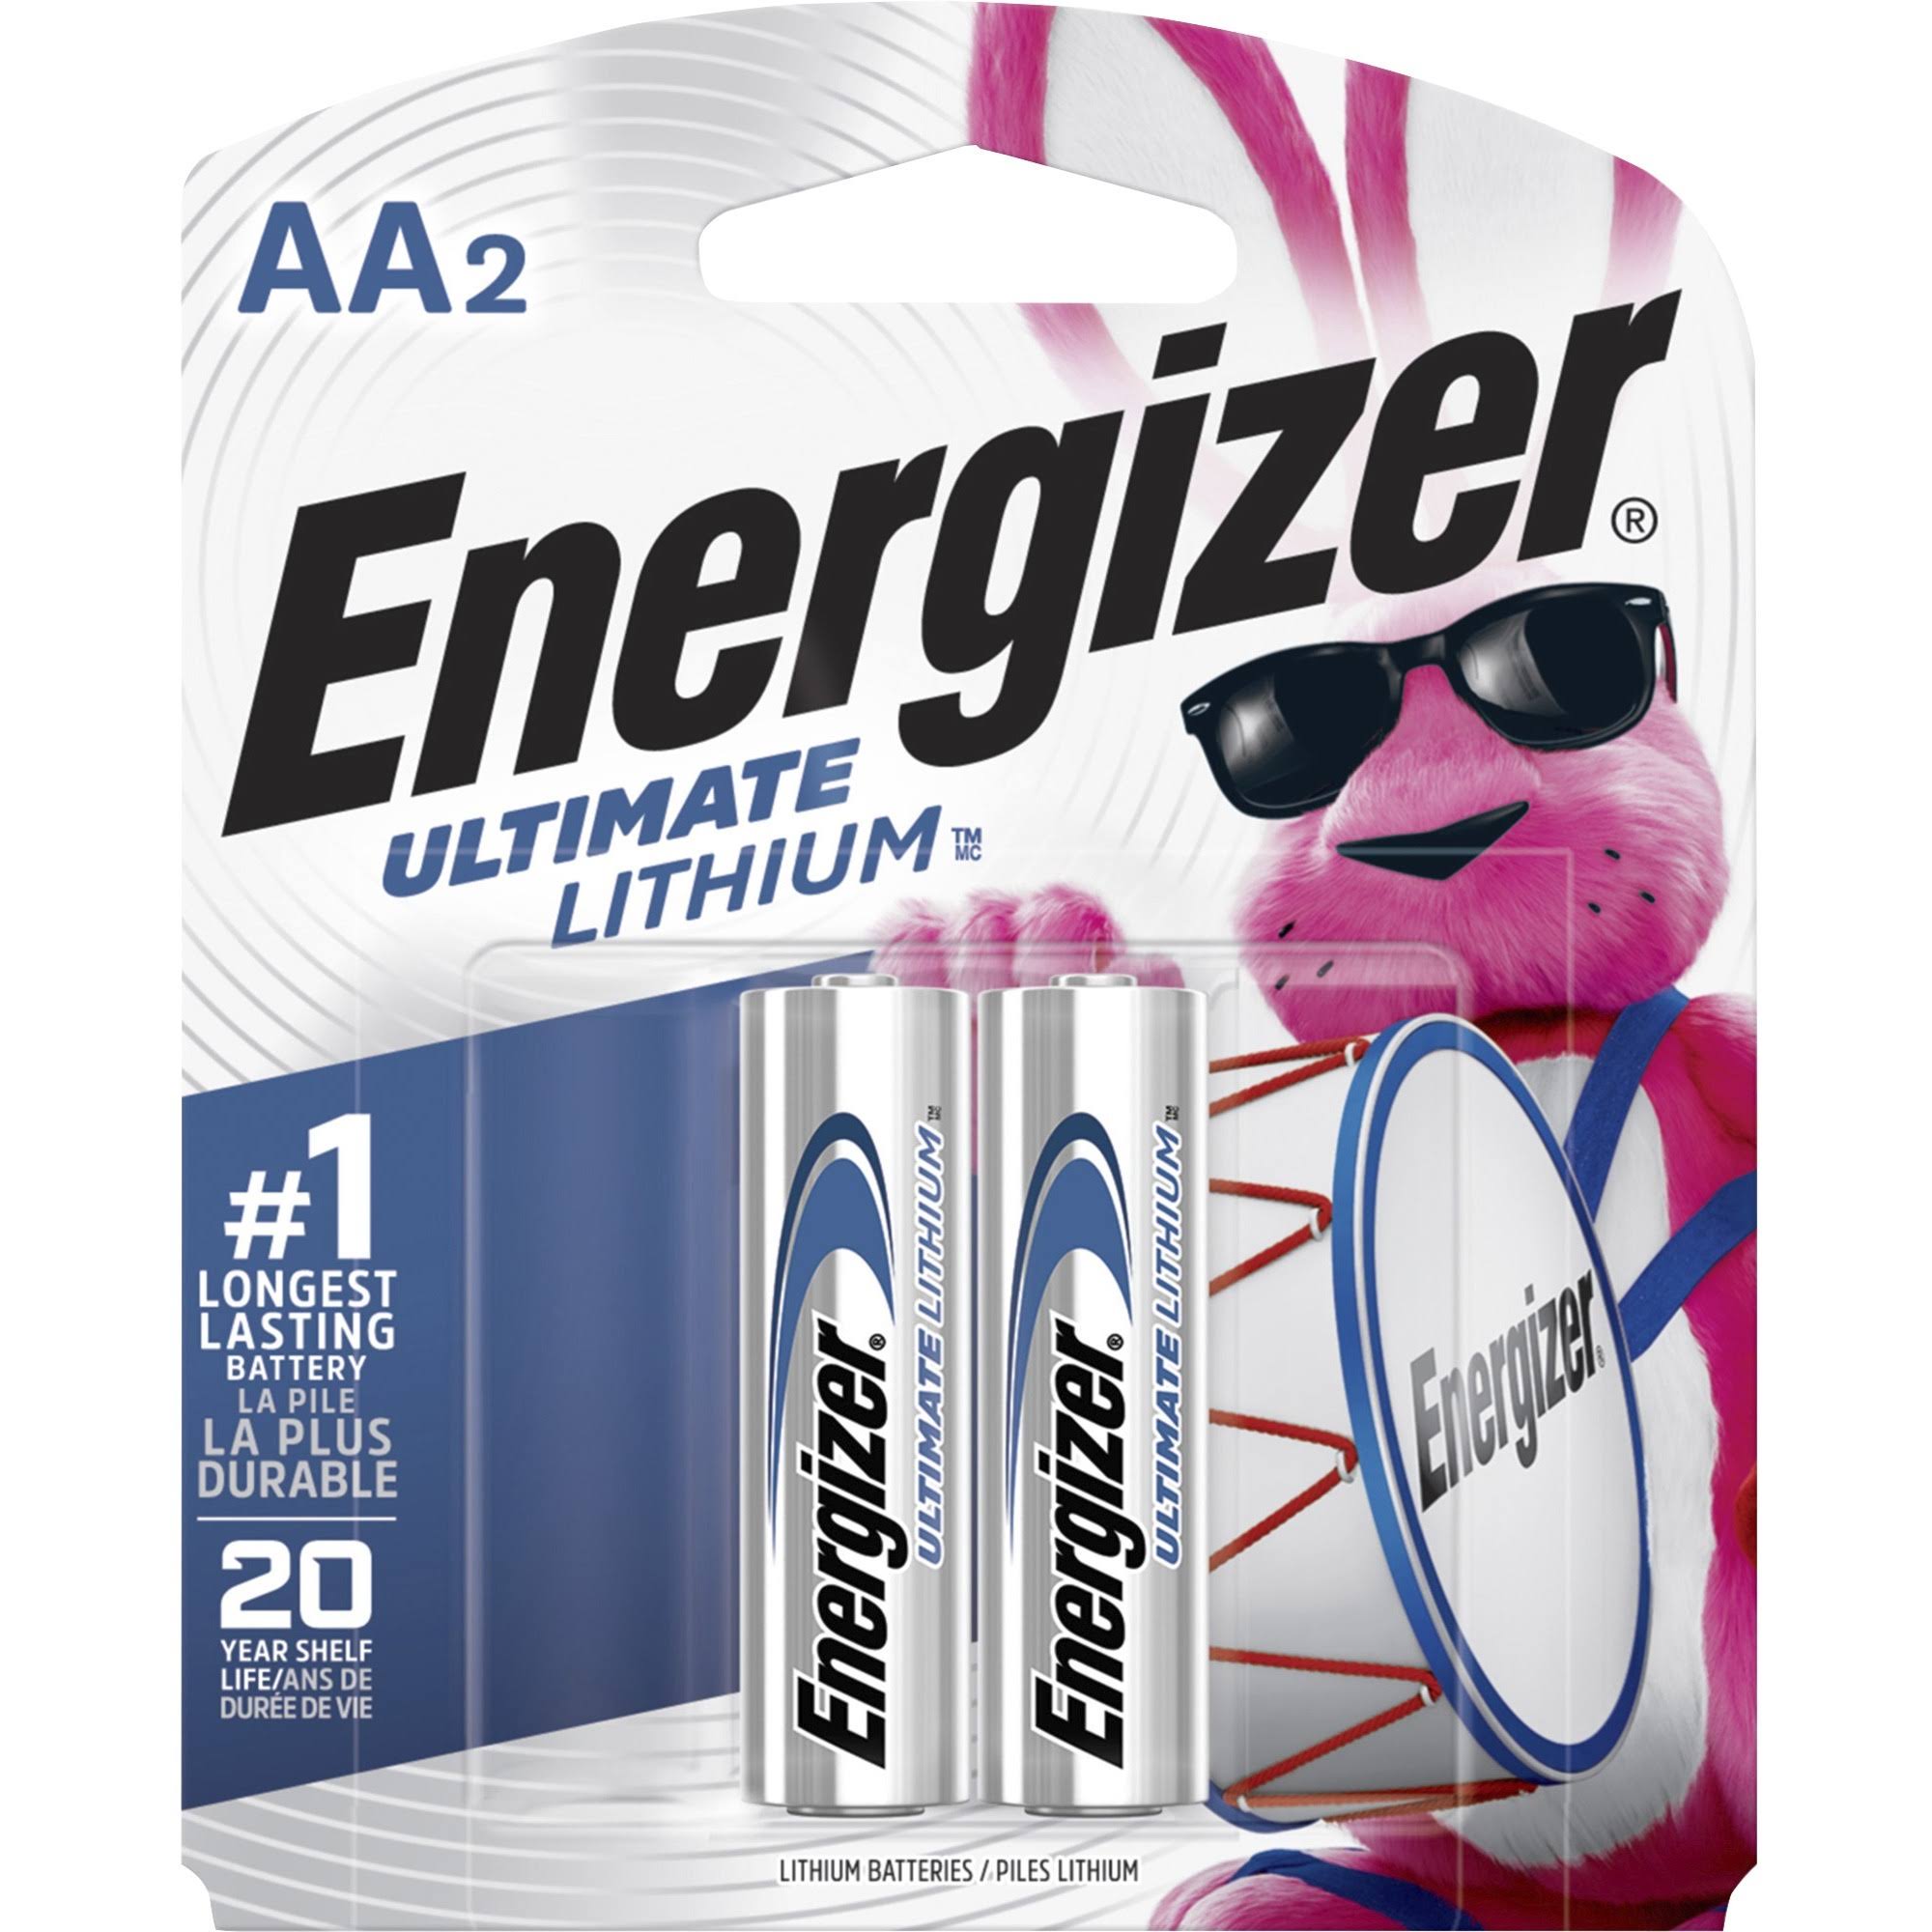 Energizer AA Lithium Batteries - 2 Pack